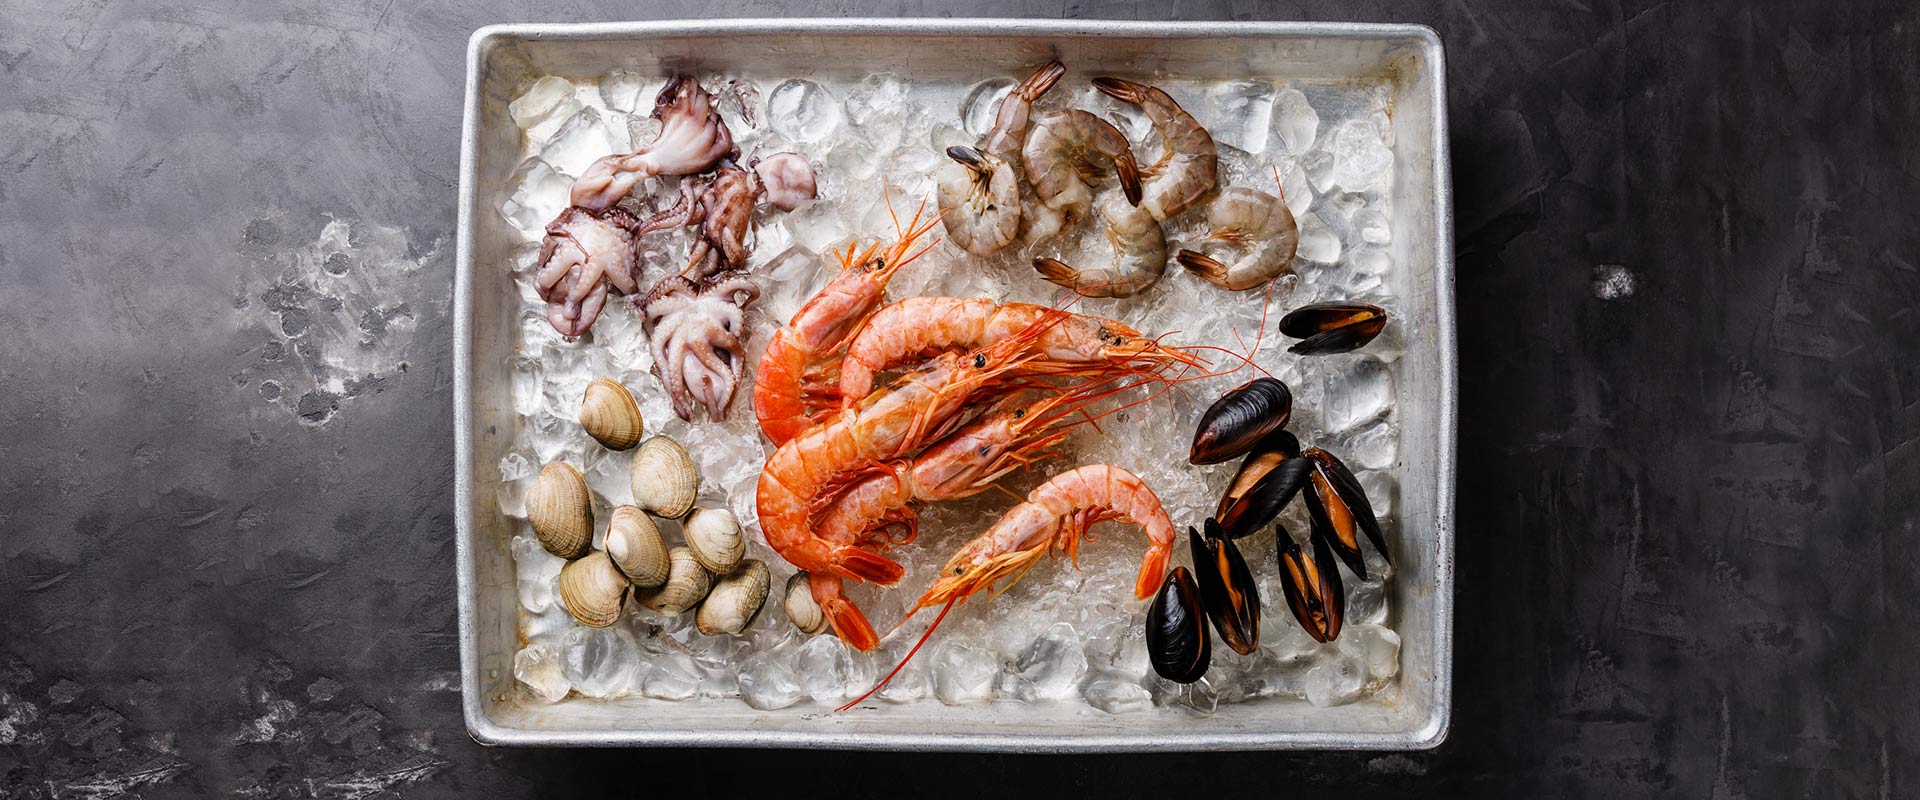 Quality seafoodwithout compromise